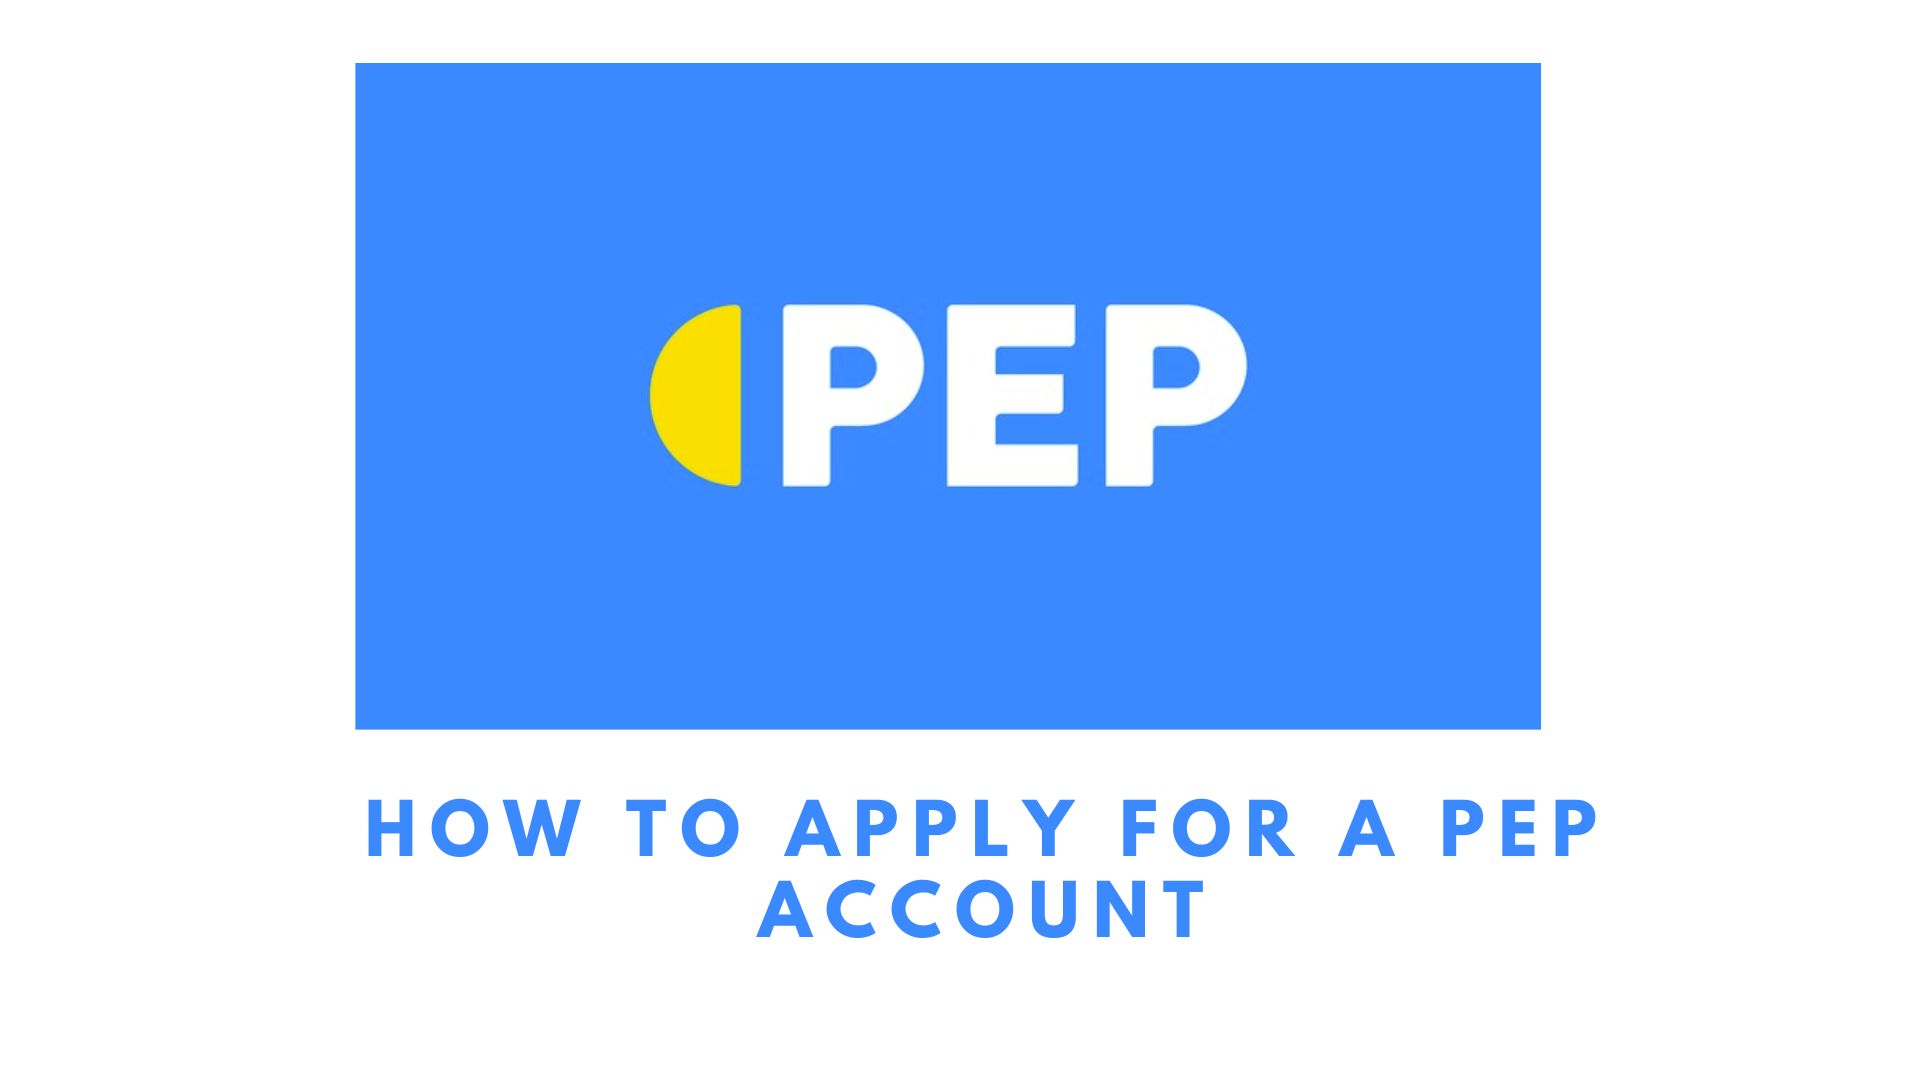 How to apply for a PEP Account